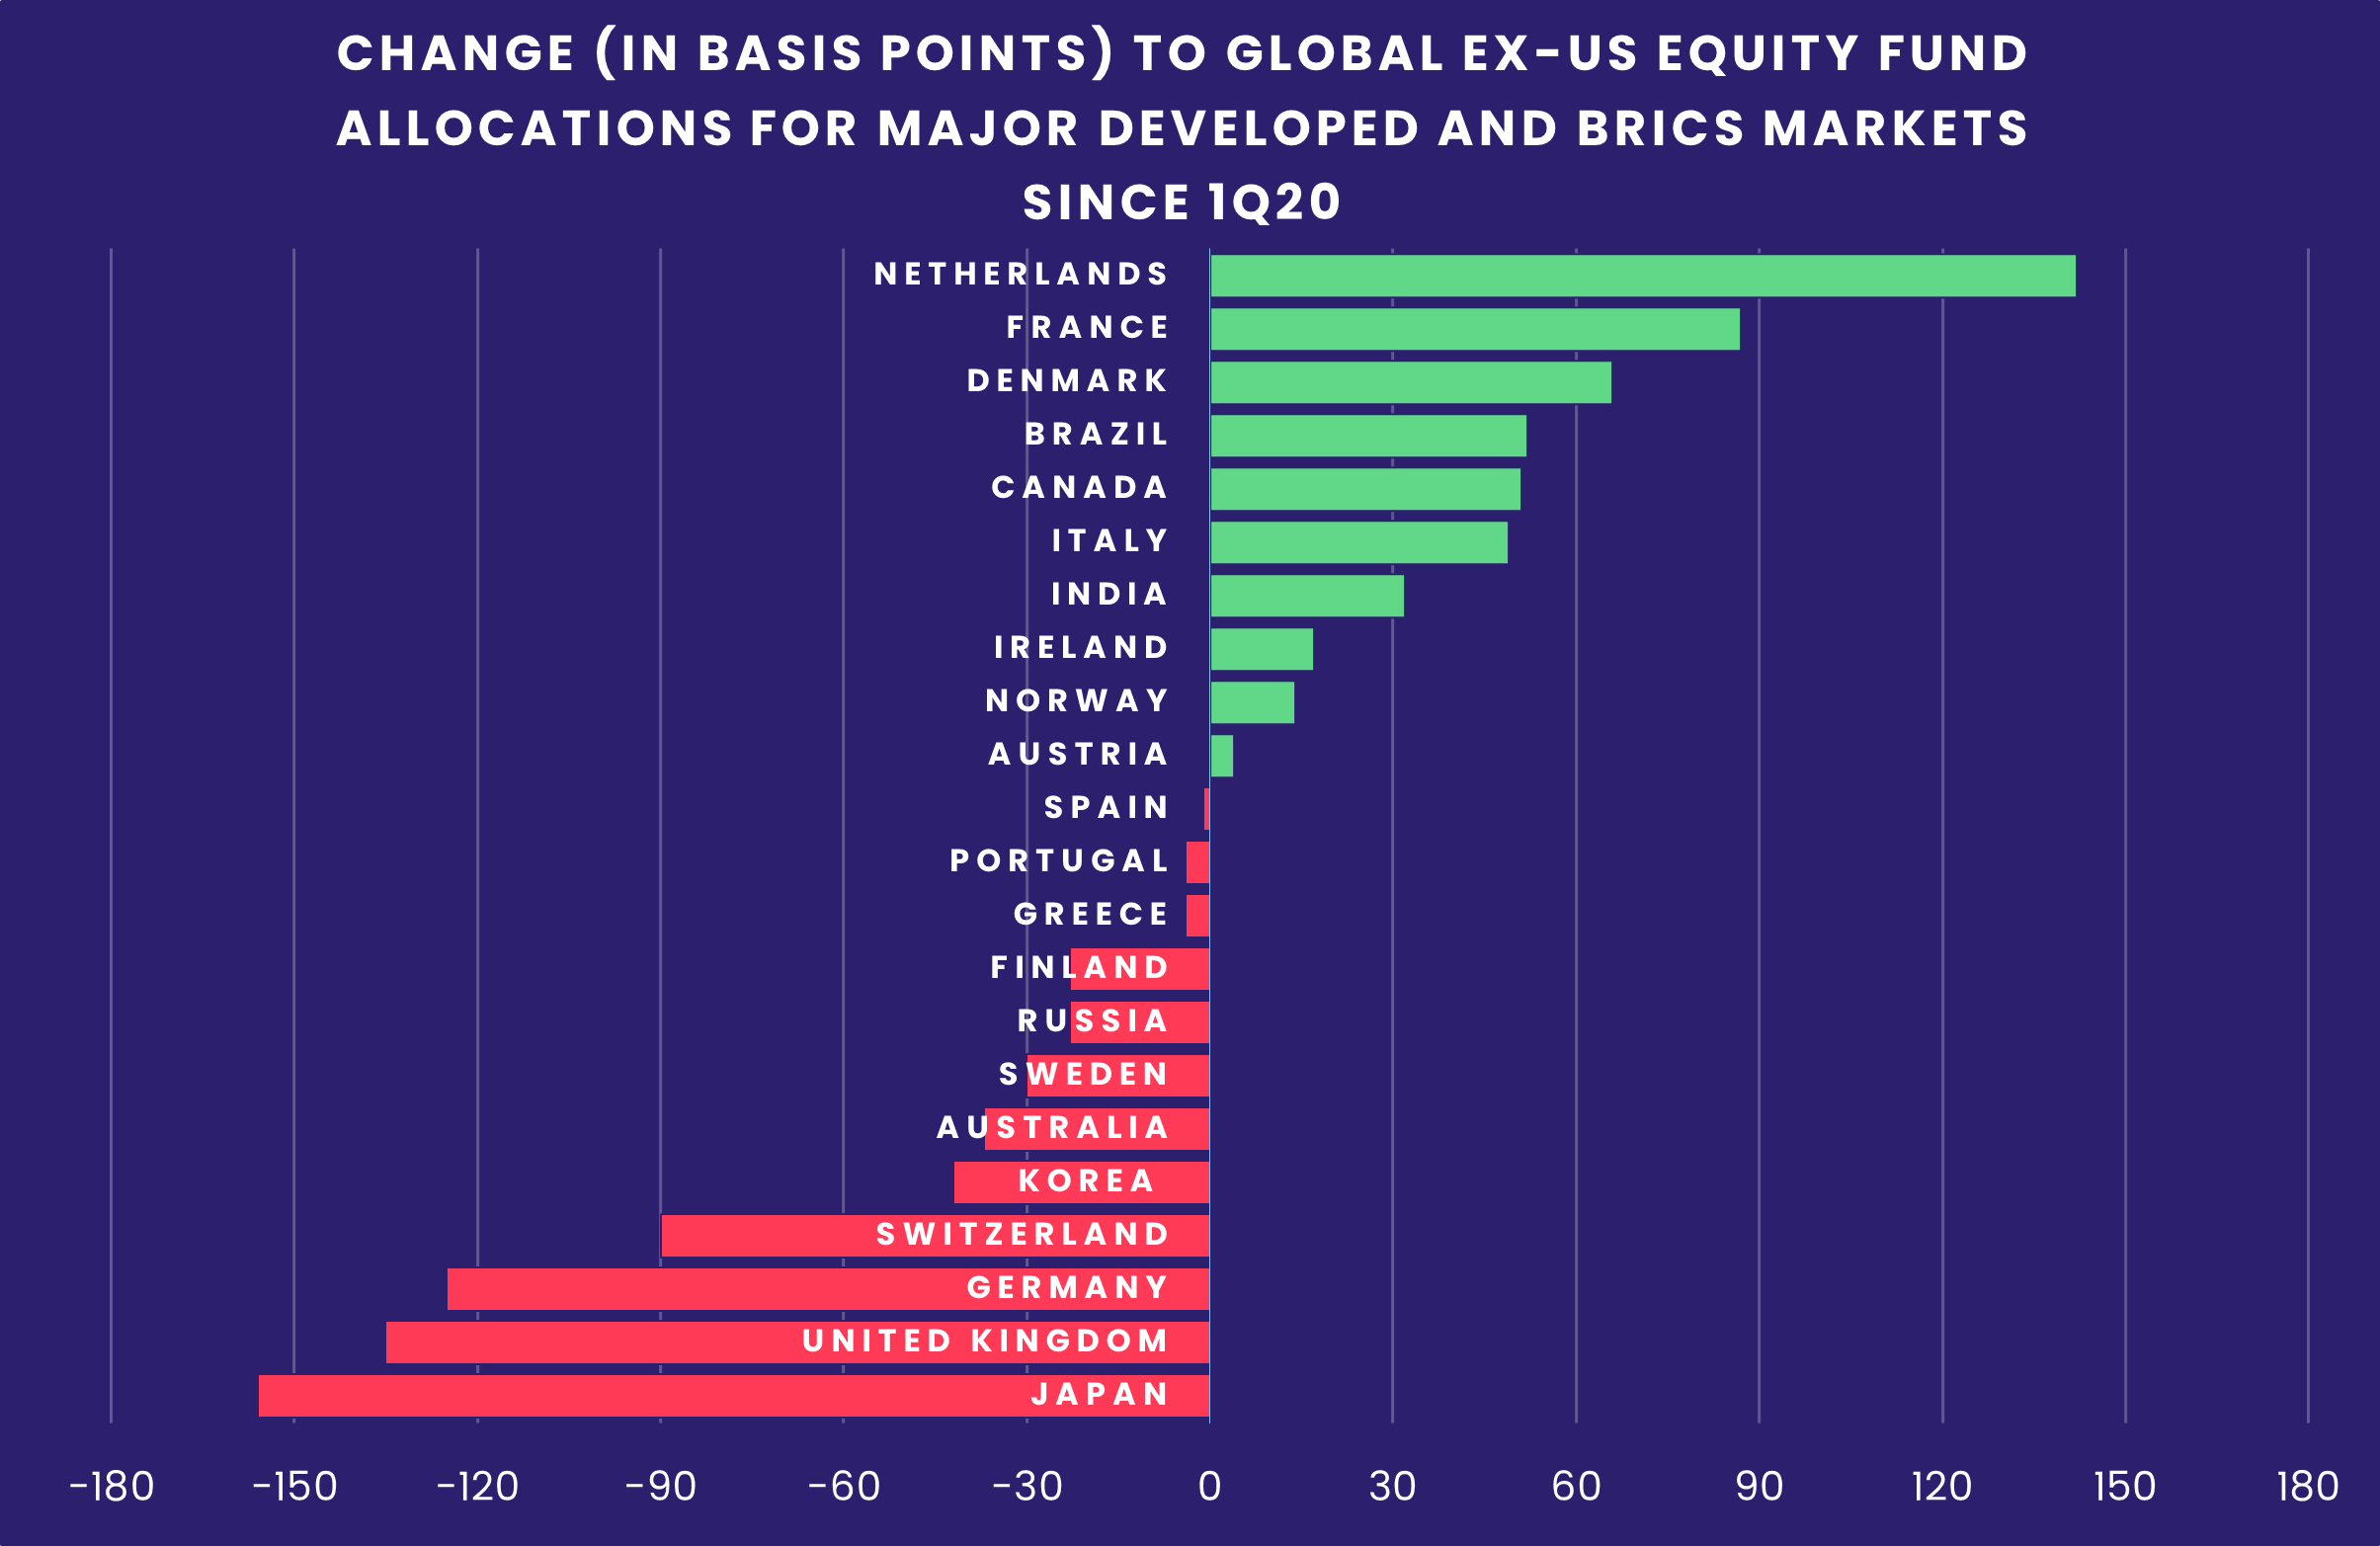 Chart representing 'CHANGE (IN BASIS POINTS) TO GLOBAL EX-US EQUITY FUND ALLOCATIONS FOR MAJOR DEVELOPED AND BRICS MARKETS SINCE 1Q20'